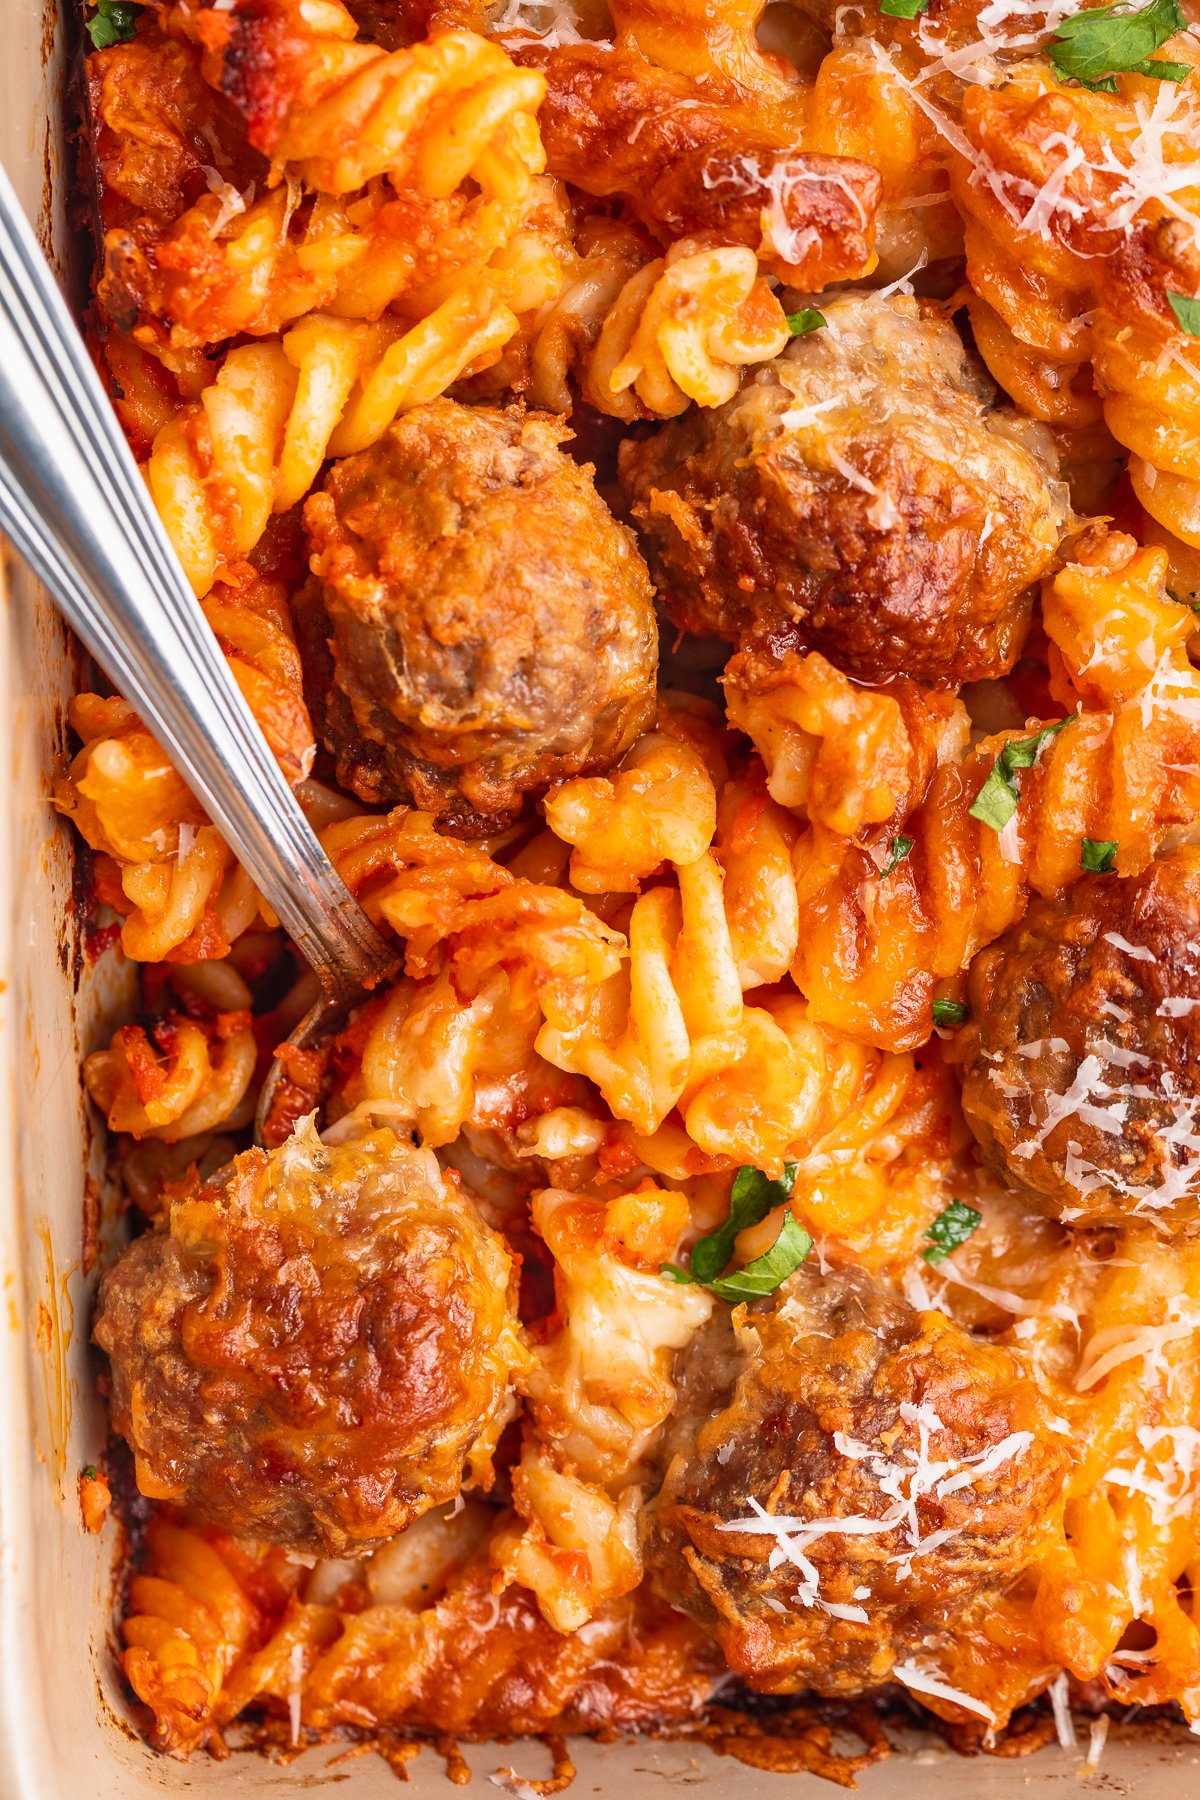 Close-up look at meatball casserole with rotini noodles, red sauce, and cheese.